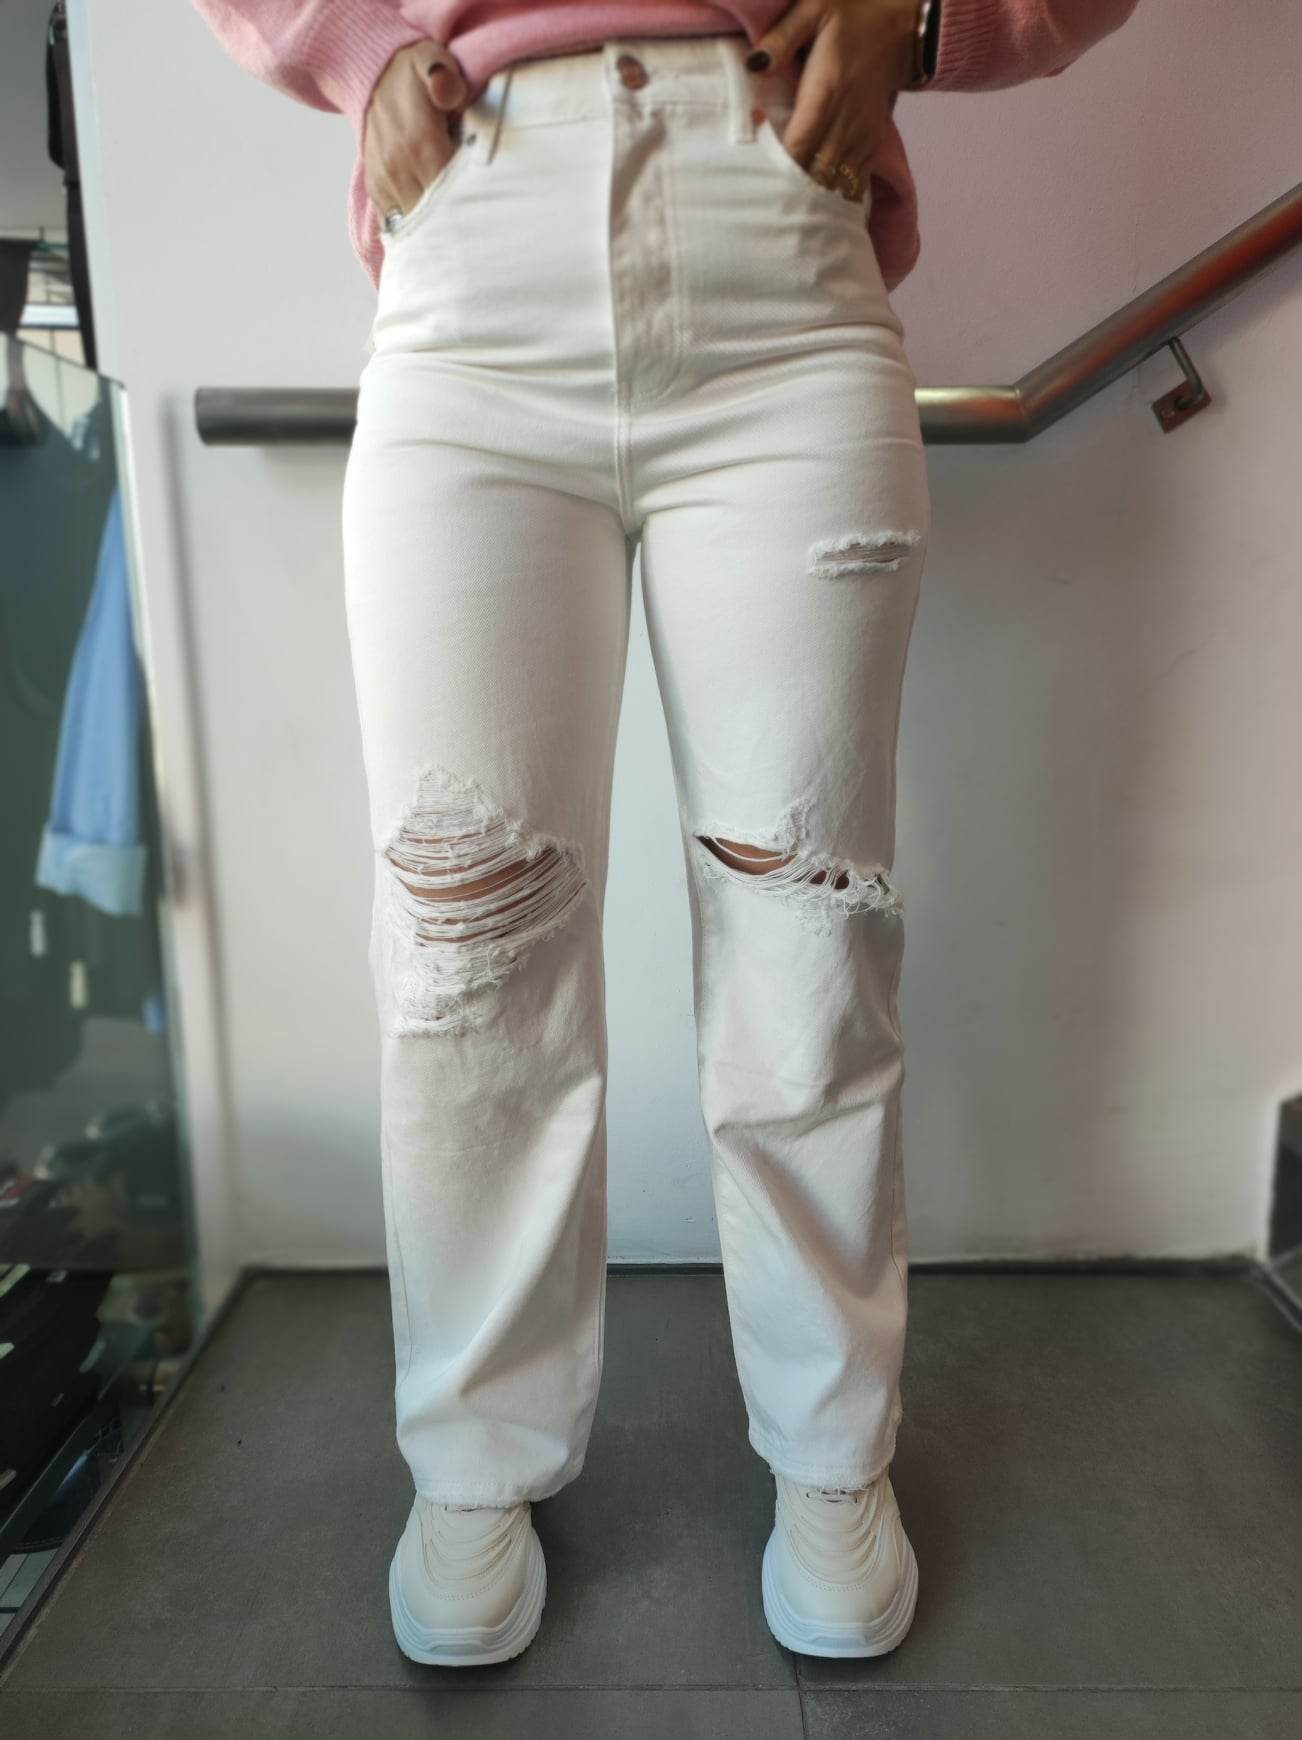 TROUSER KISS PINK 22/22 ΜΟΝΟC. JEANS RIPPED BUGGY